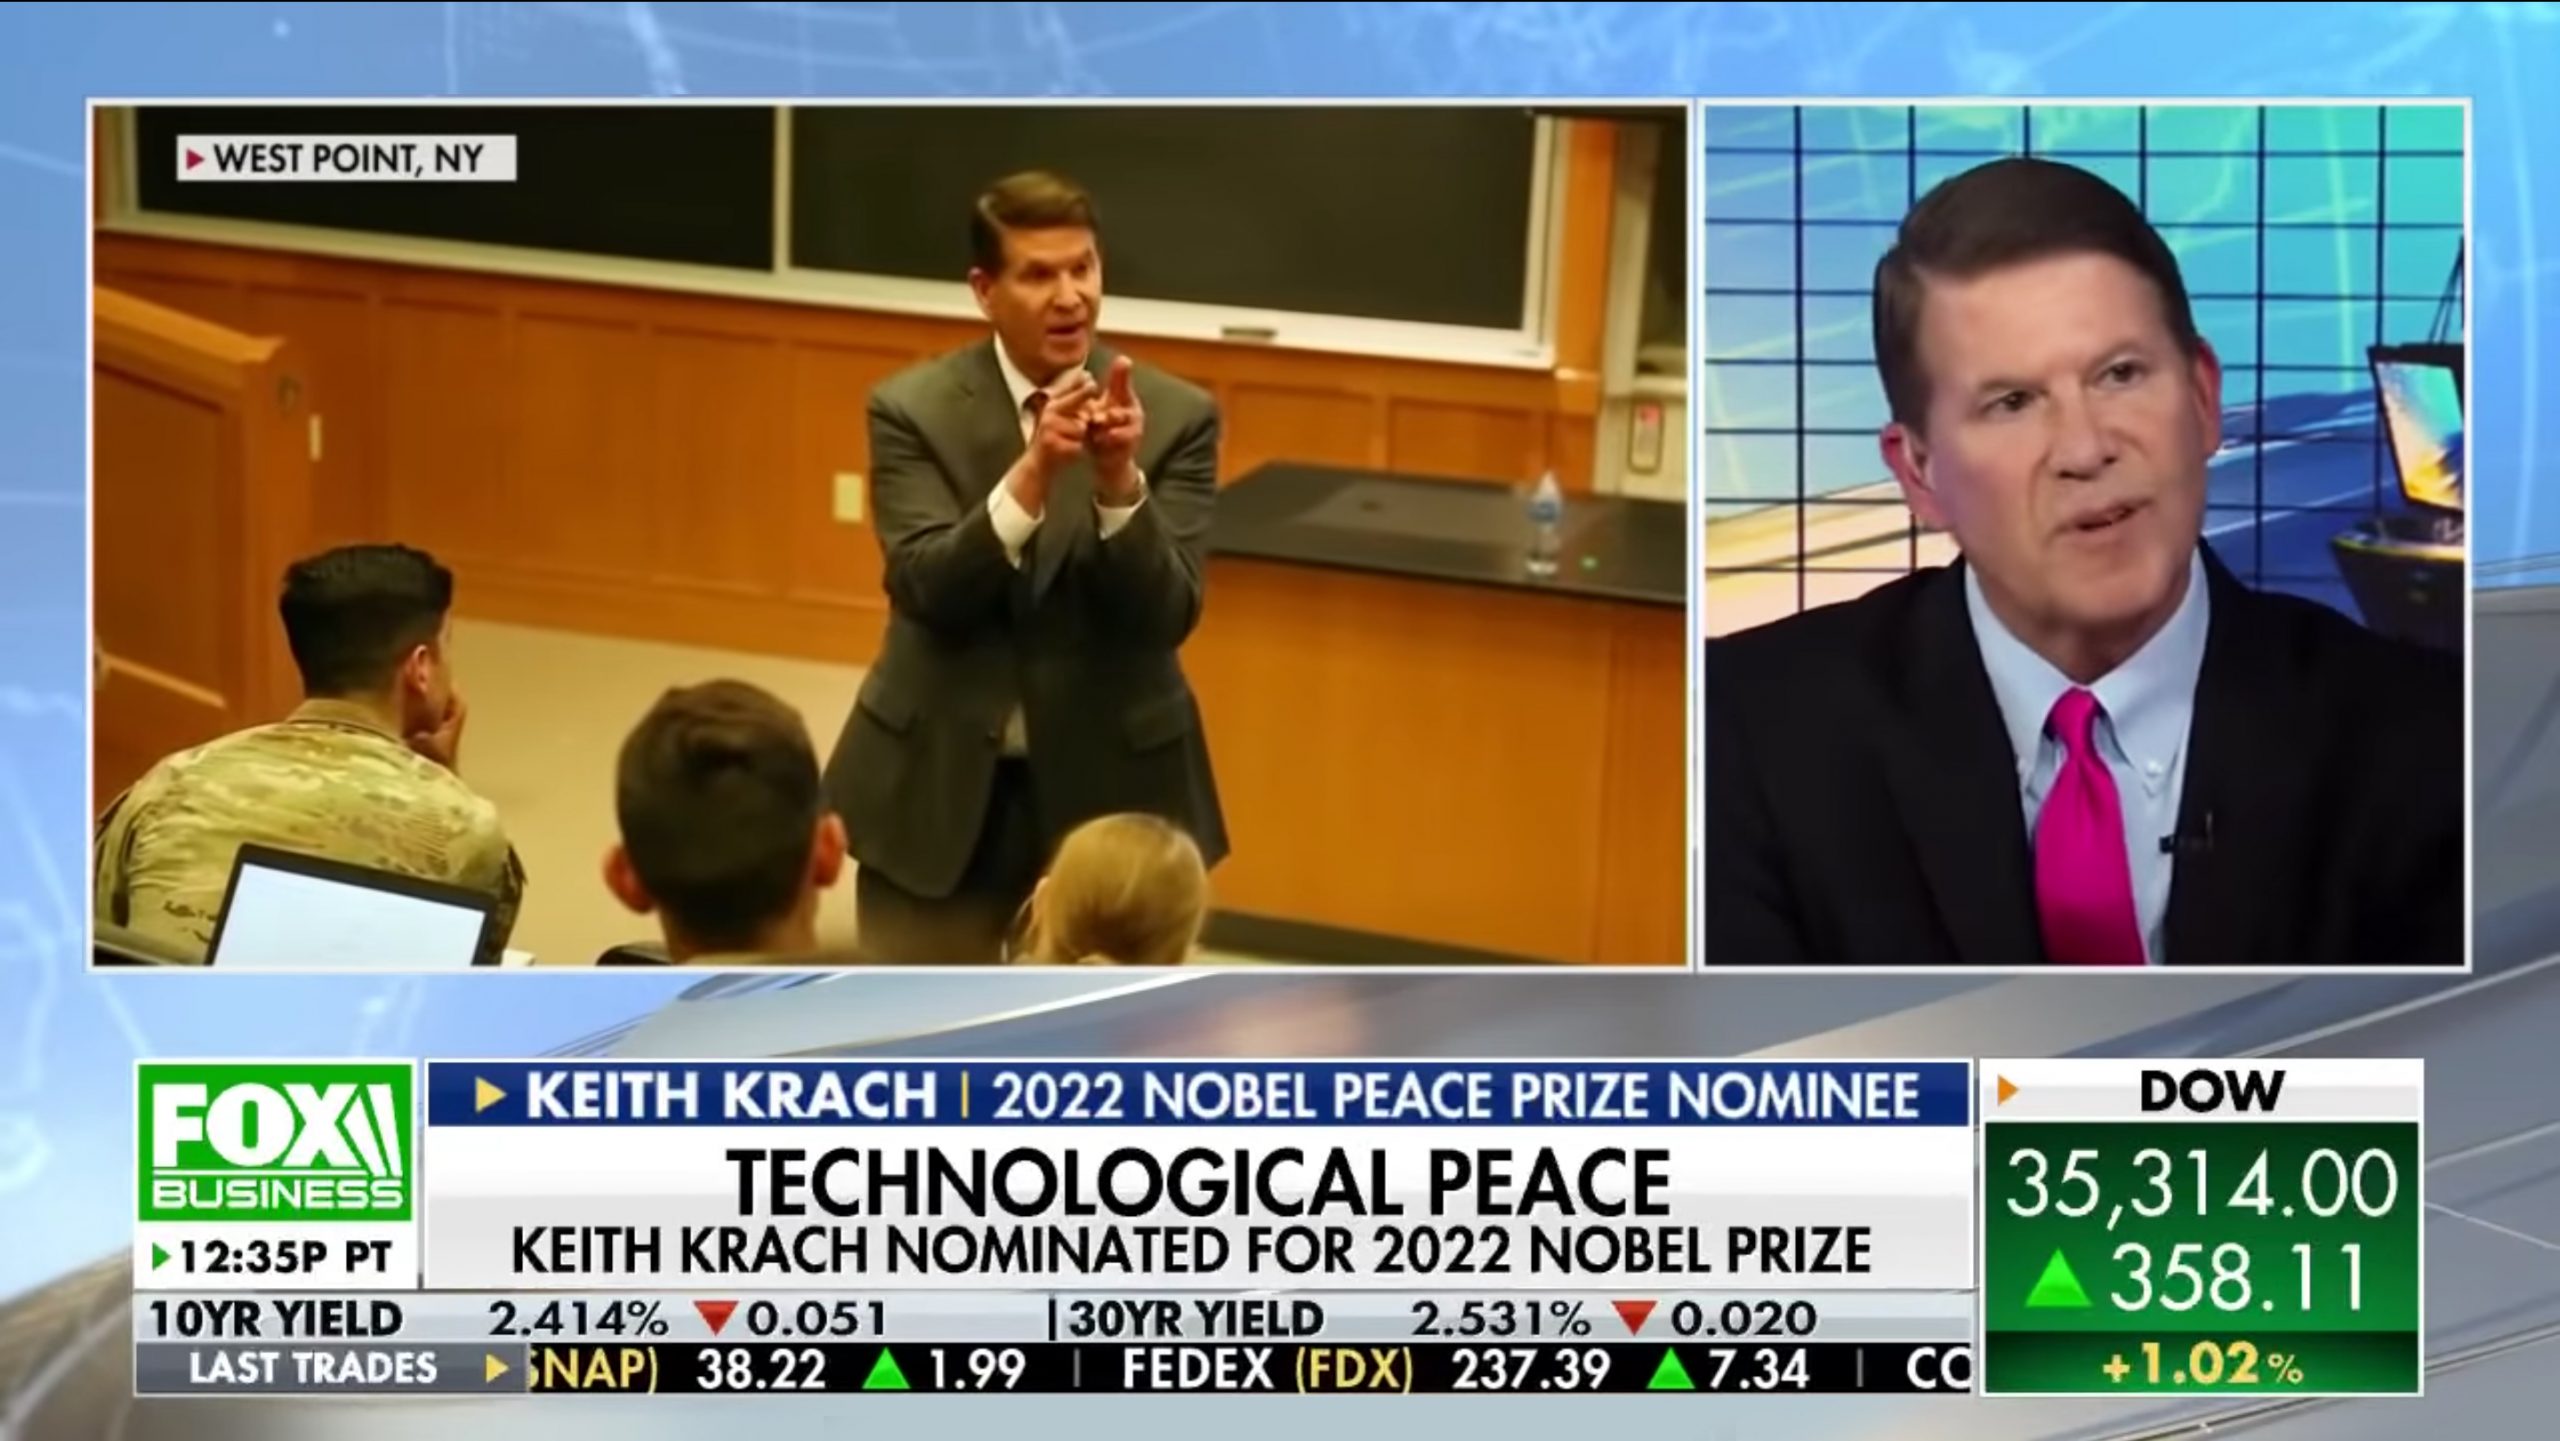 Keith Krach Nominated 2022 Nobel Peace Prize ‘Trust Doctrine’ to Advance Freedom